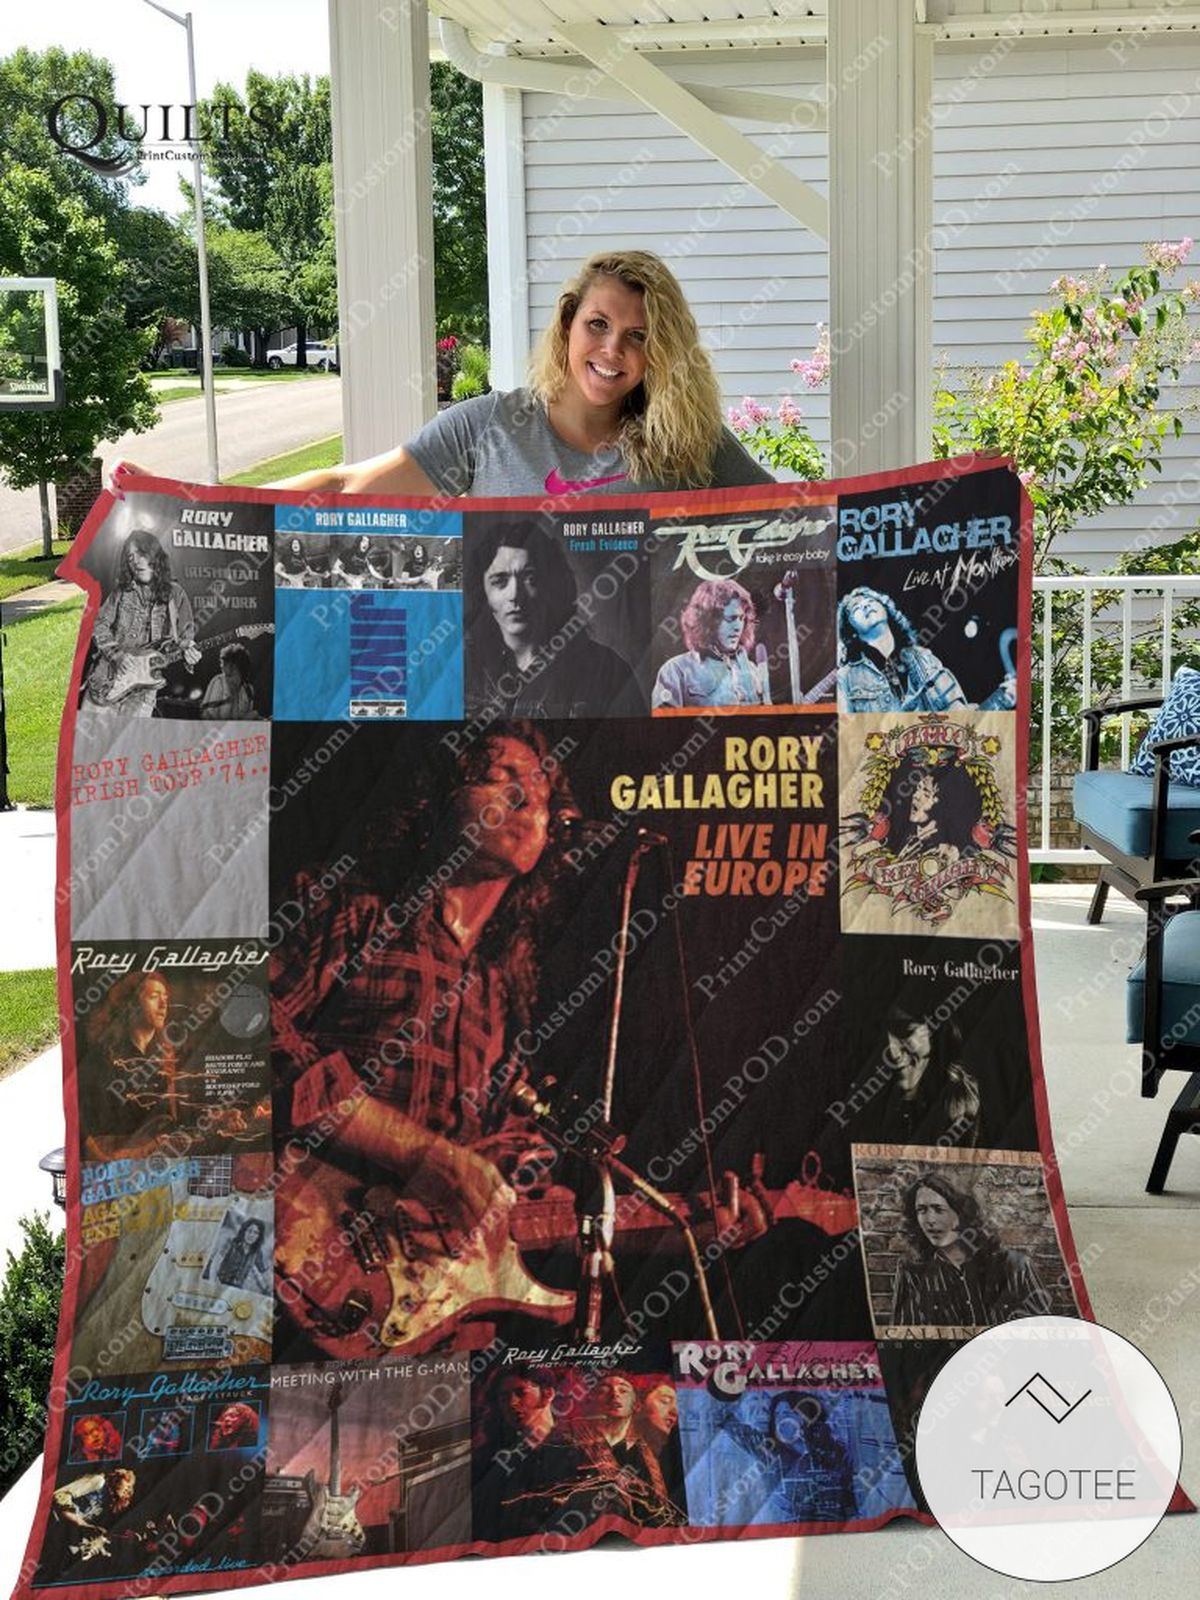 Rory Gallagher Albums For Fans Version Quilt Blanket